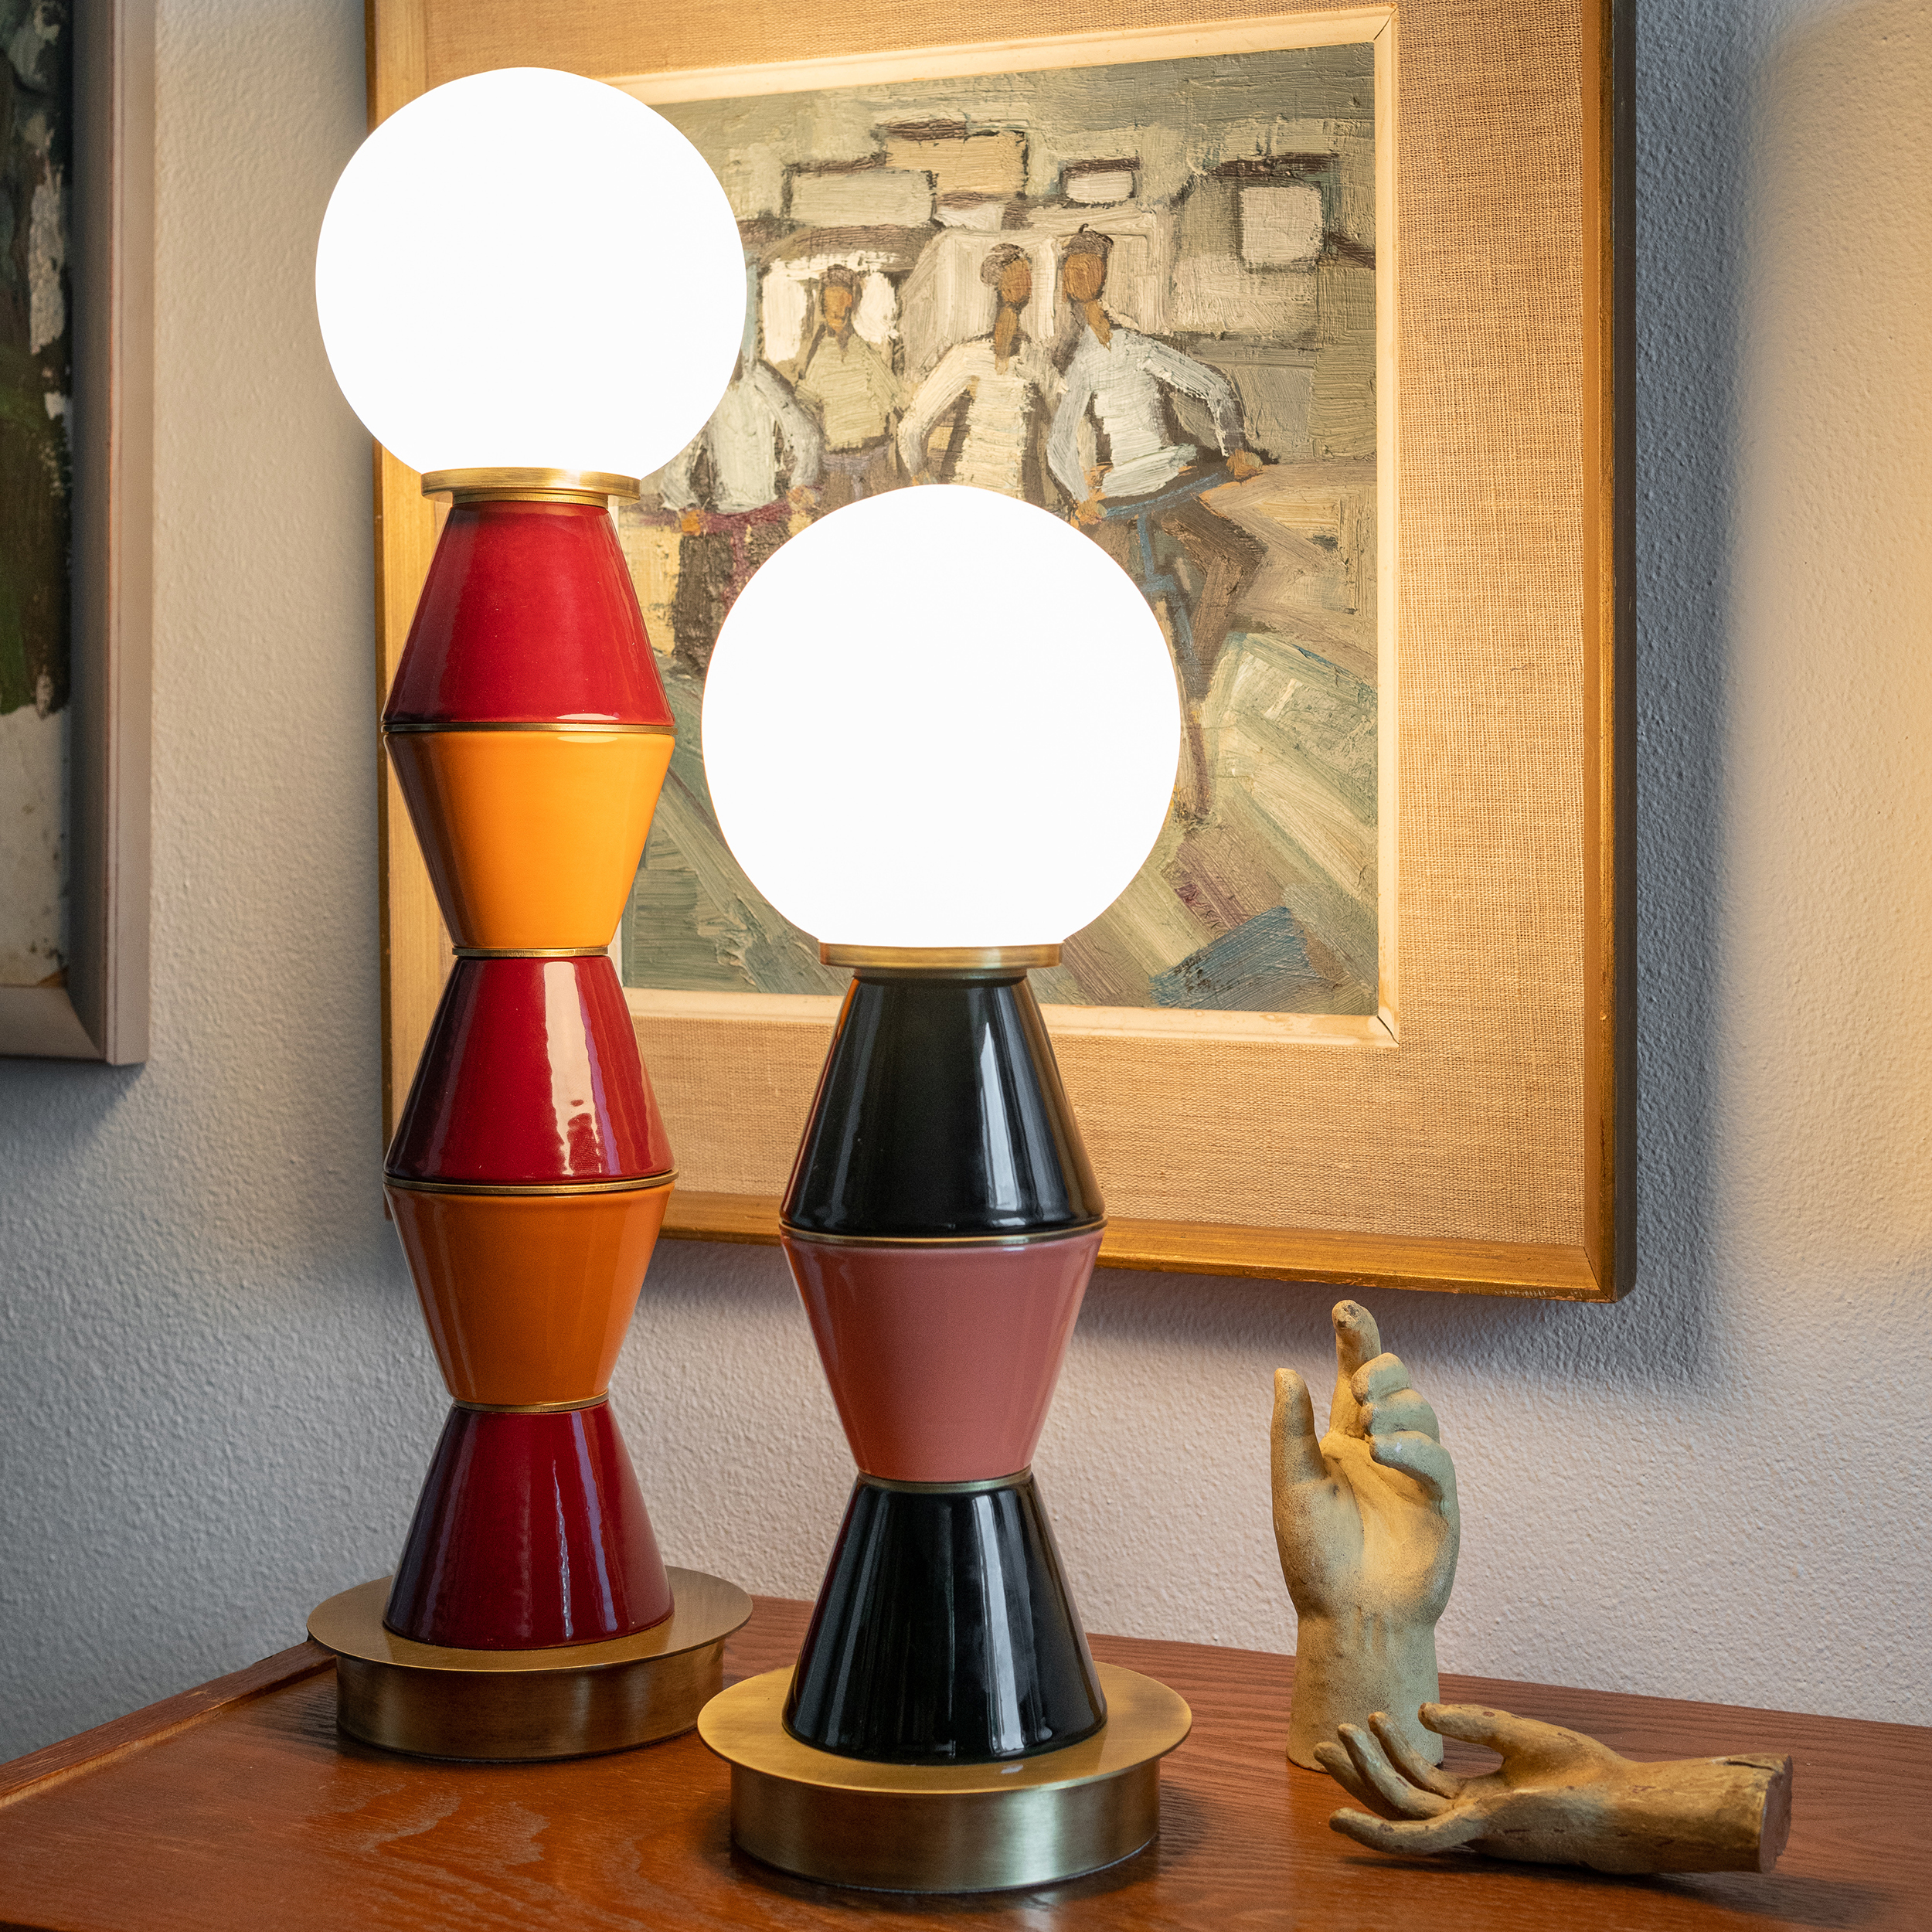 Palm - Small table lamp three elements